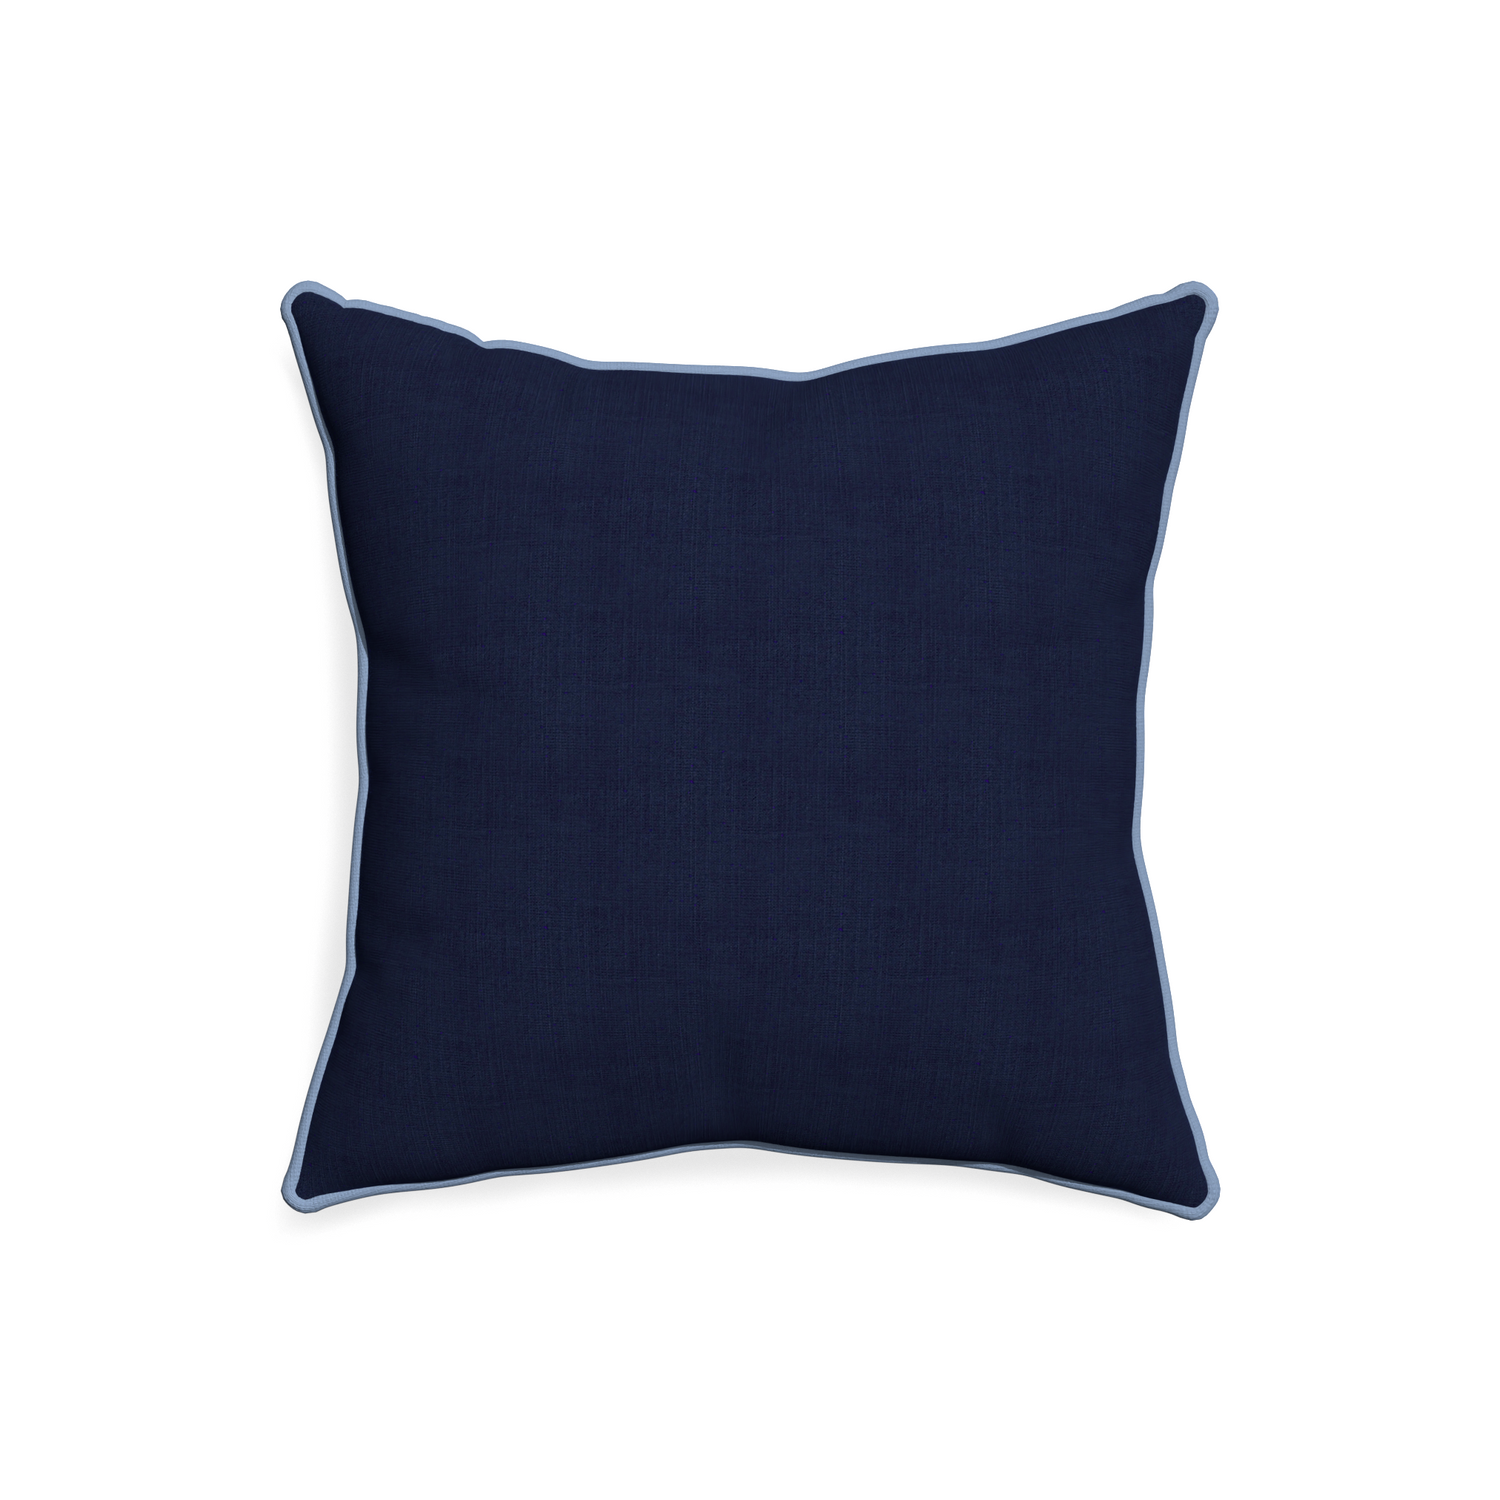 20-square midnight custom pillow with sky piping on white background